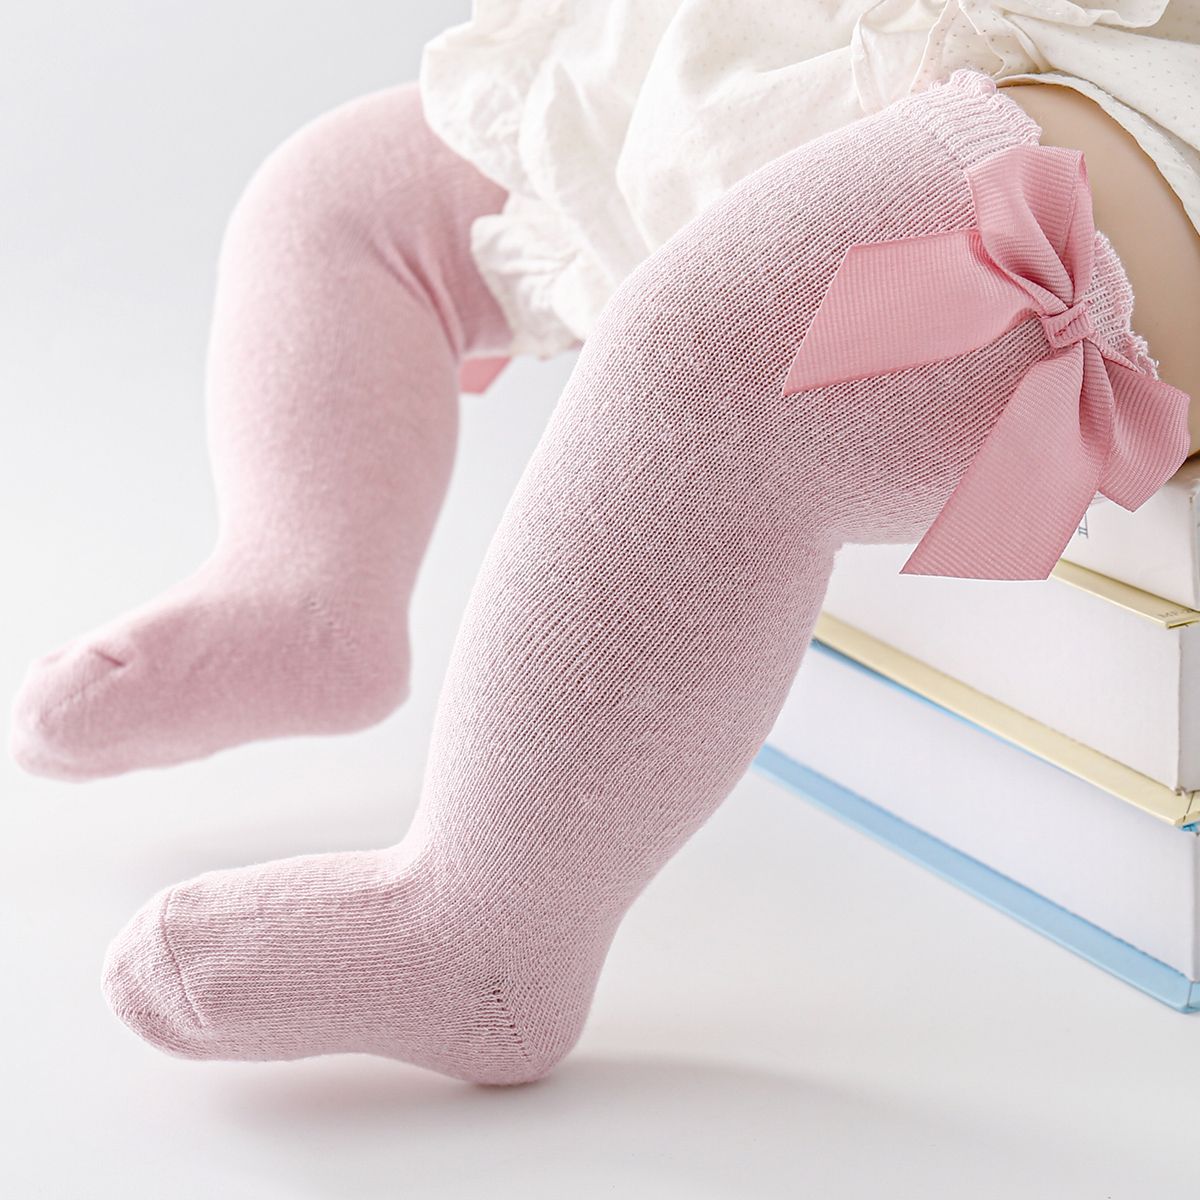 Bow Mid-calf Socks Available In 6 Colors For Baby/toddler